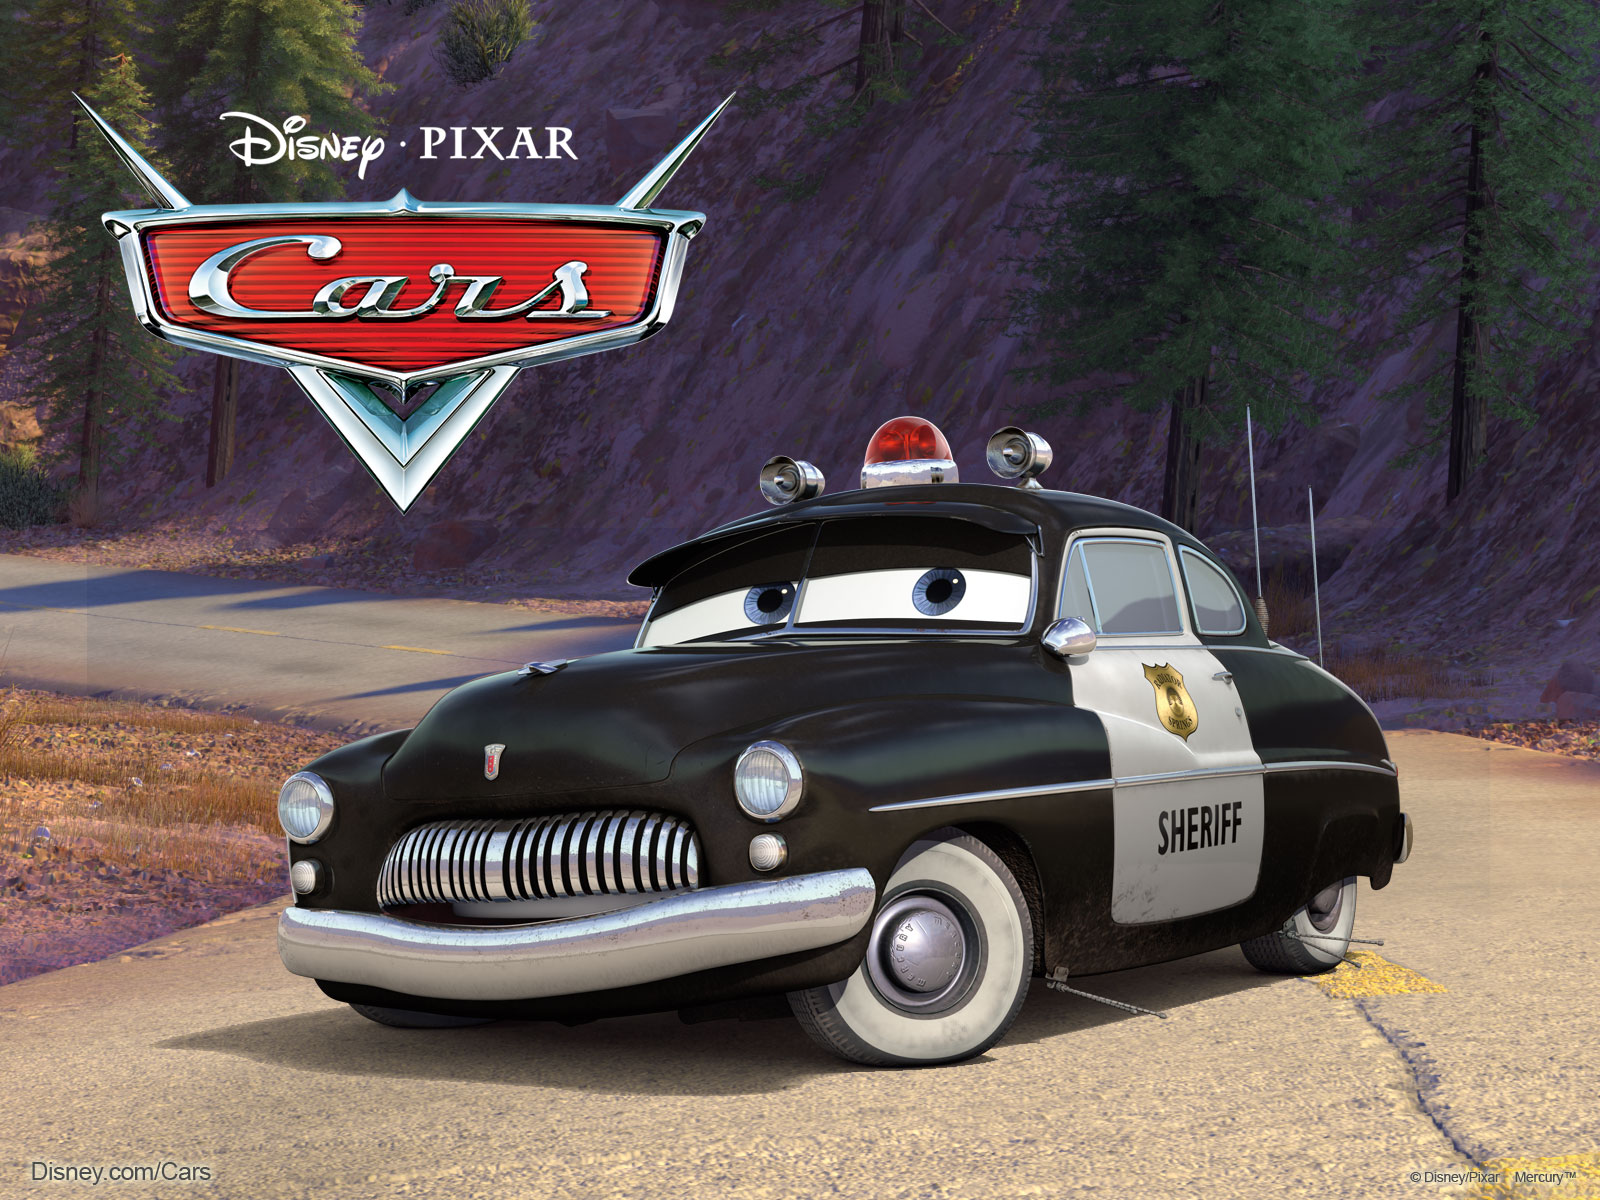 The Sheriff Police Car from Pixars Cars Movie wallpaper   Click